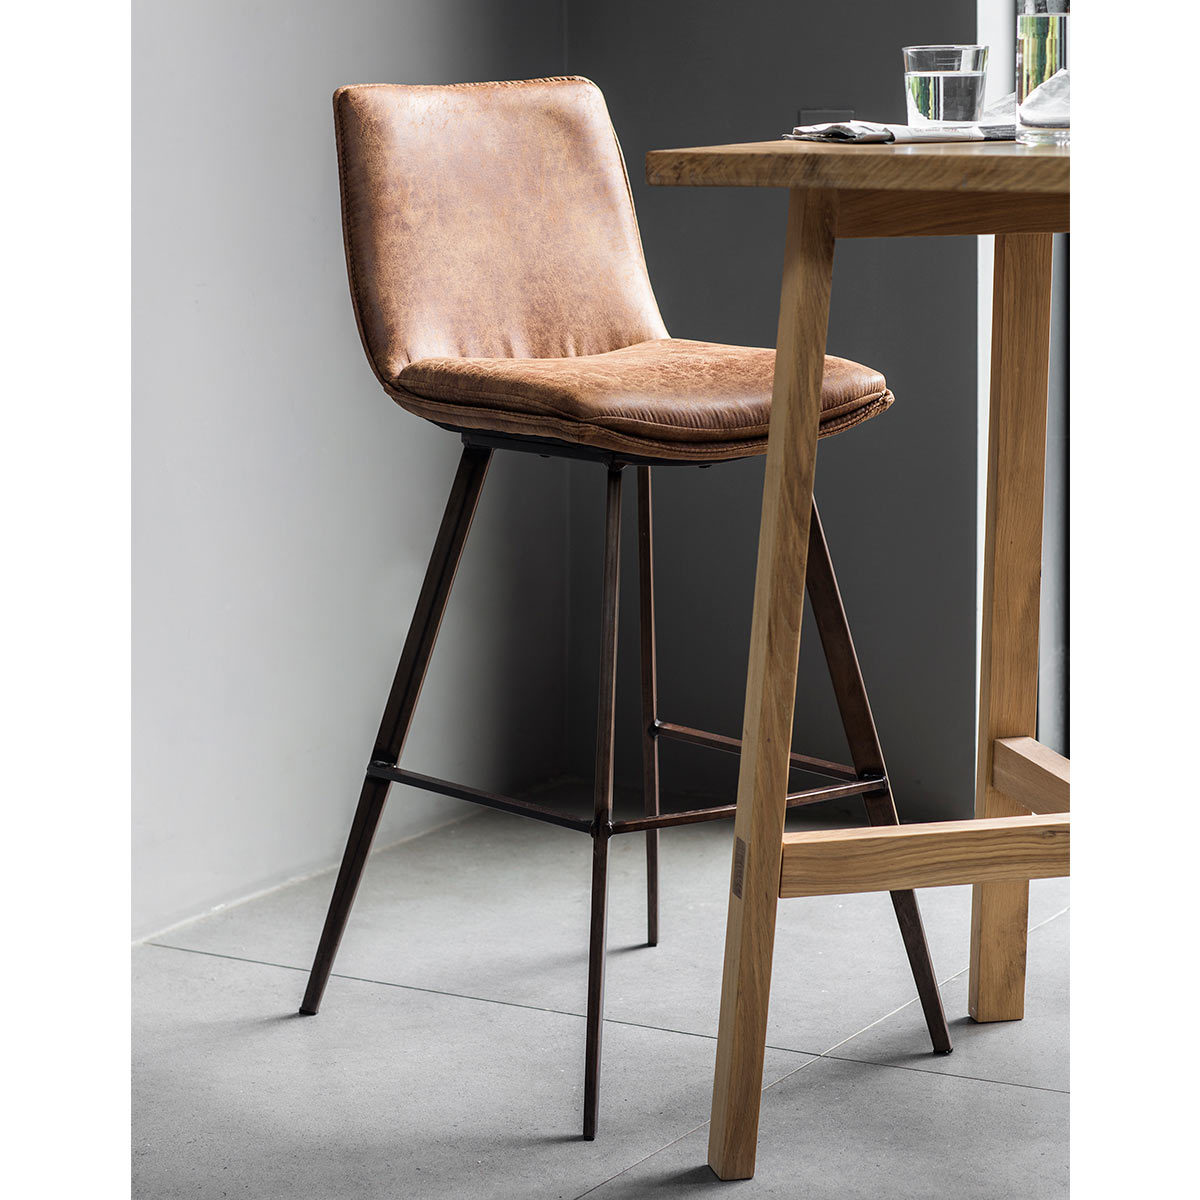 Gallery Palmer Brown Faux Leather Bar, Real Leather Bar Stools With Backs Uk